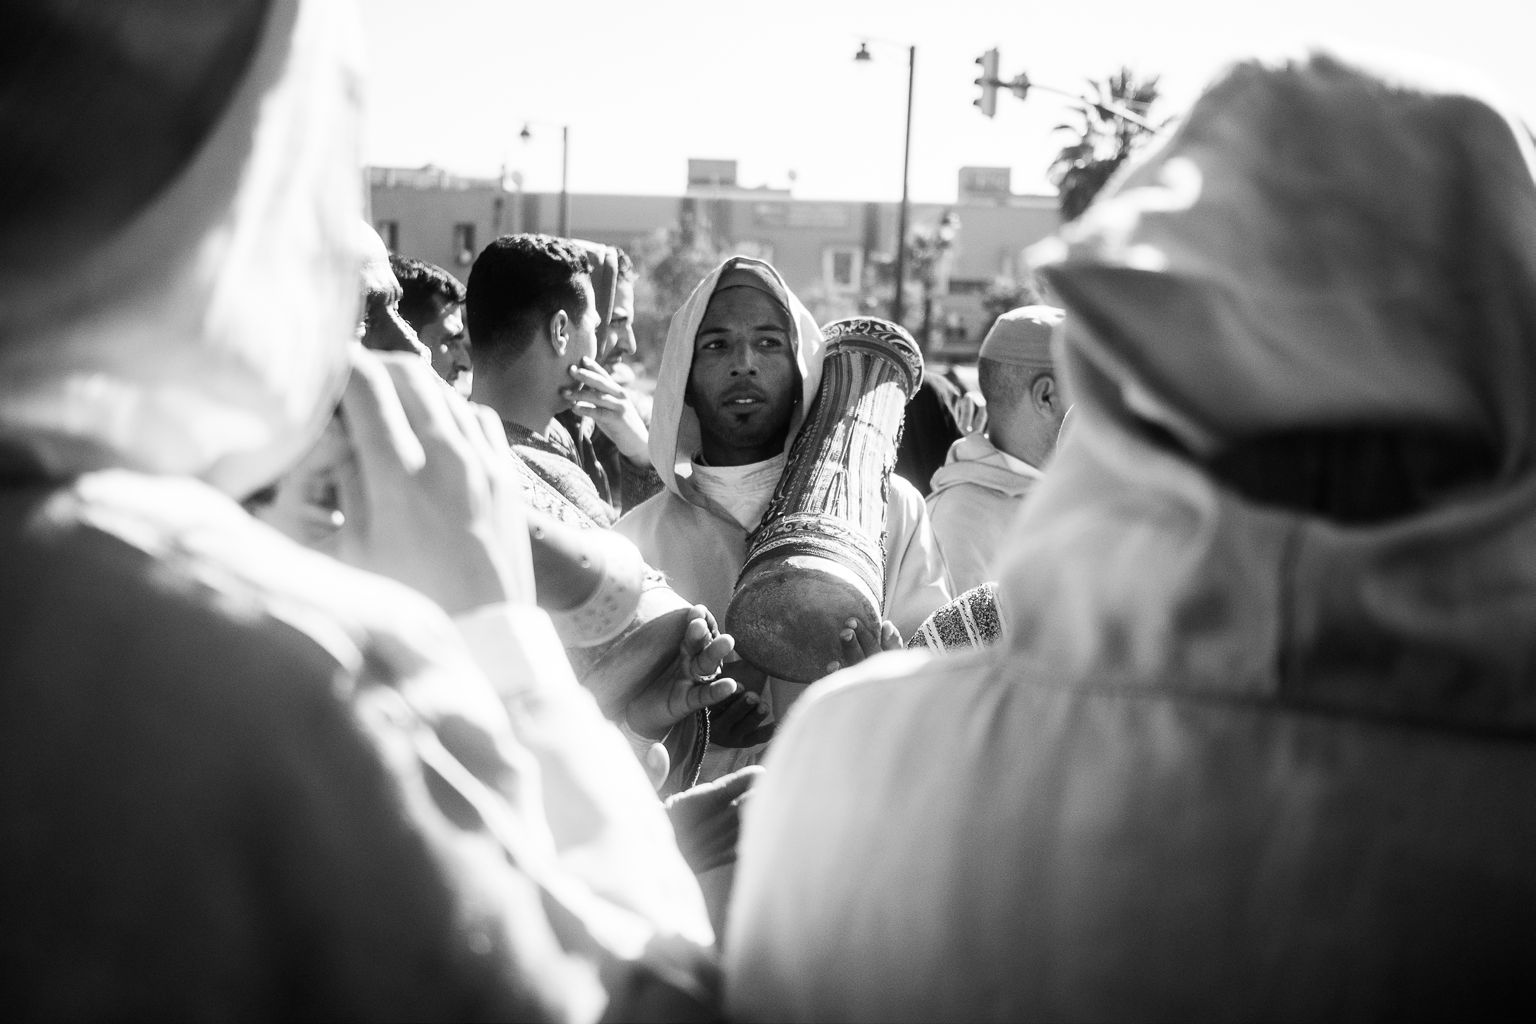 FIGURE 3. A member of the h. amādša confraternity playing a harrāz in Marrakech, during a visit of the king Mohamed VI (December 2016)